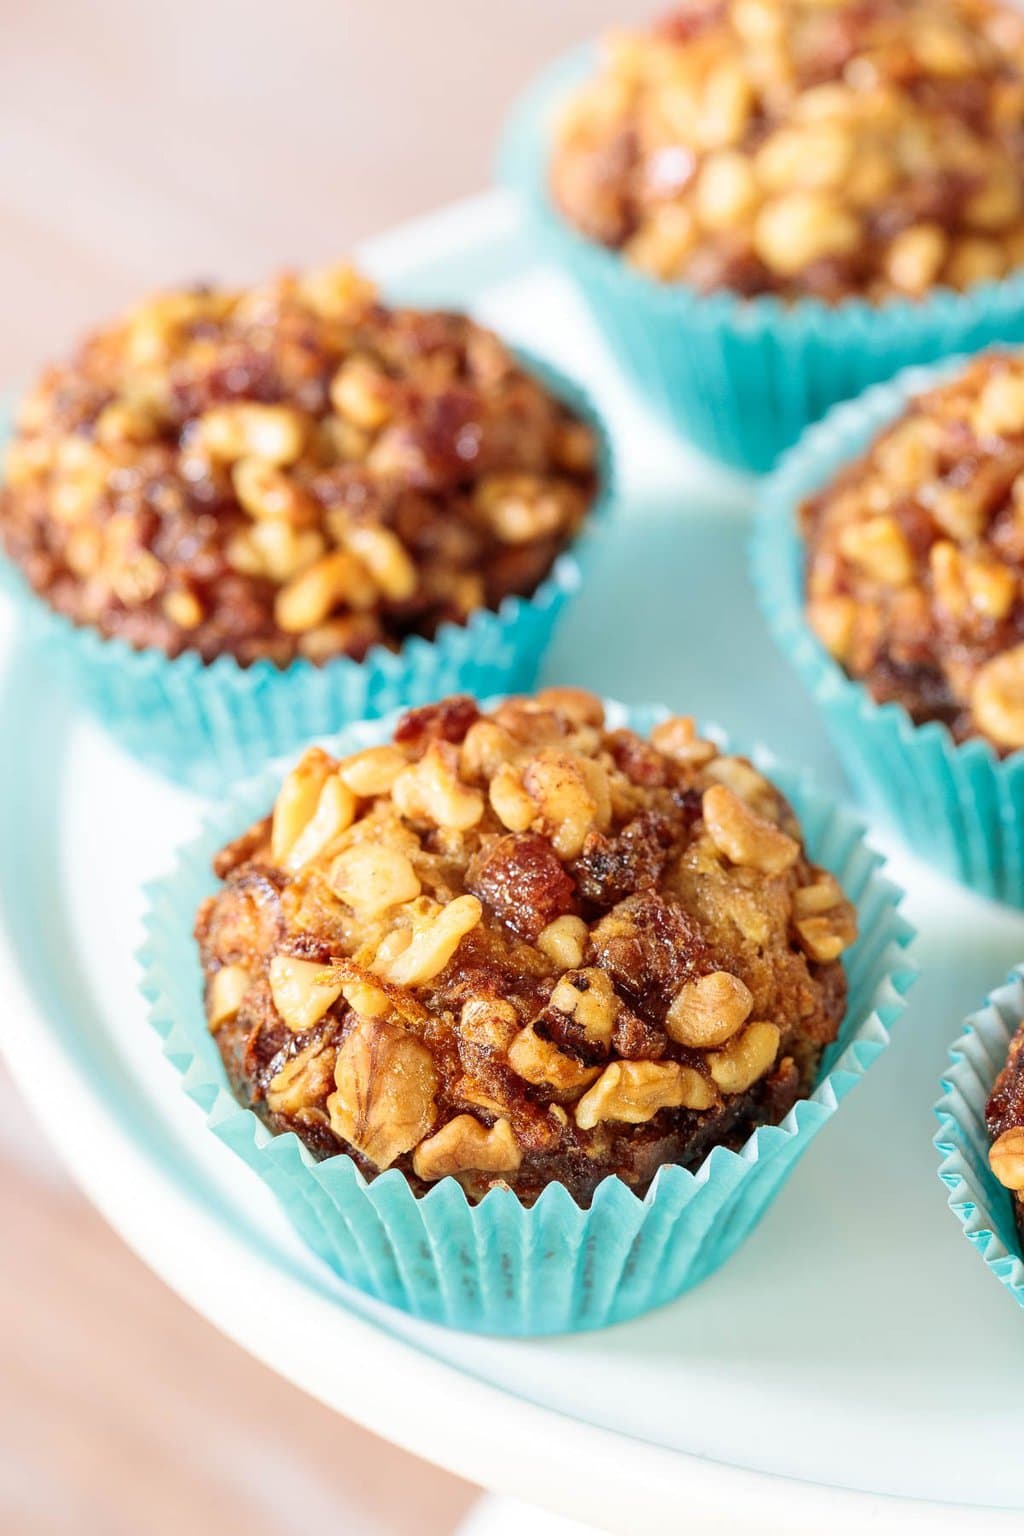 Vertical closeup photo of a batch of Candied Walnut Date Banana Muffins in turquoise cupcake liners on a white pedestal serving plate.